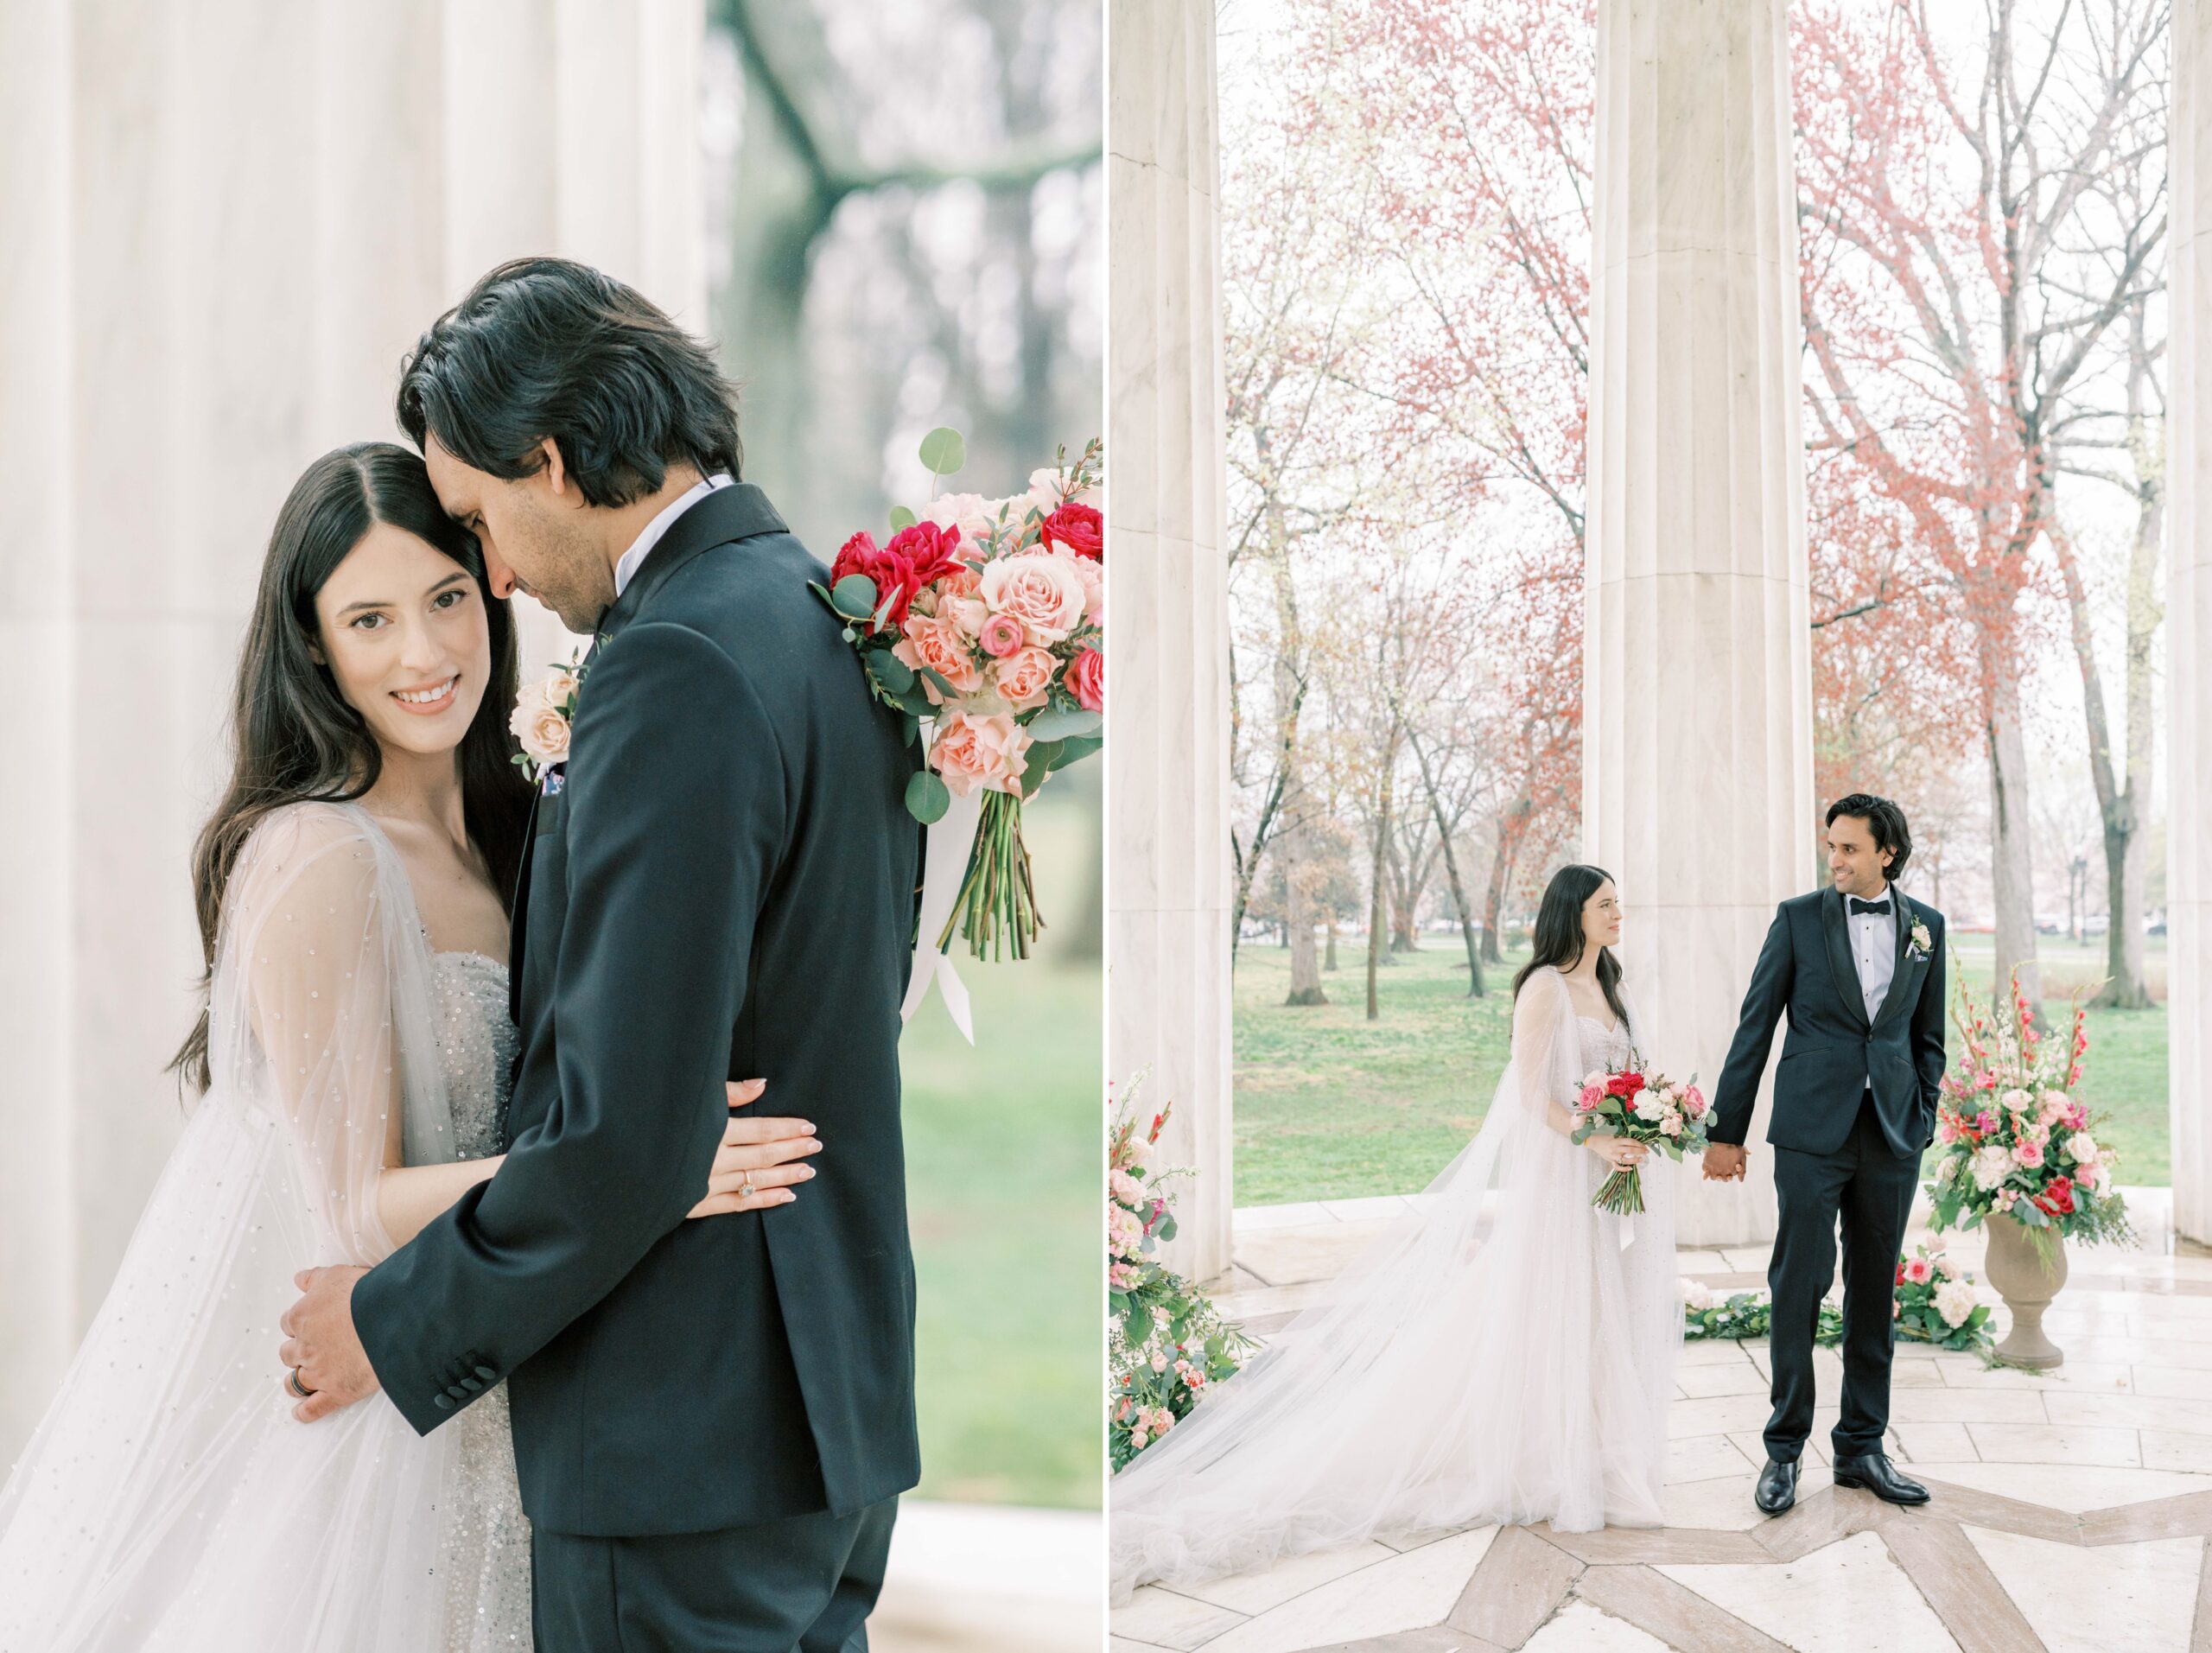 A stunning DC War Memorial wedding in Washington, DC followed by Cherry Blossom photos during peak bloom at the Tidal Basin!